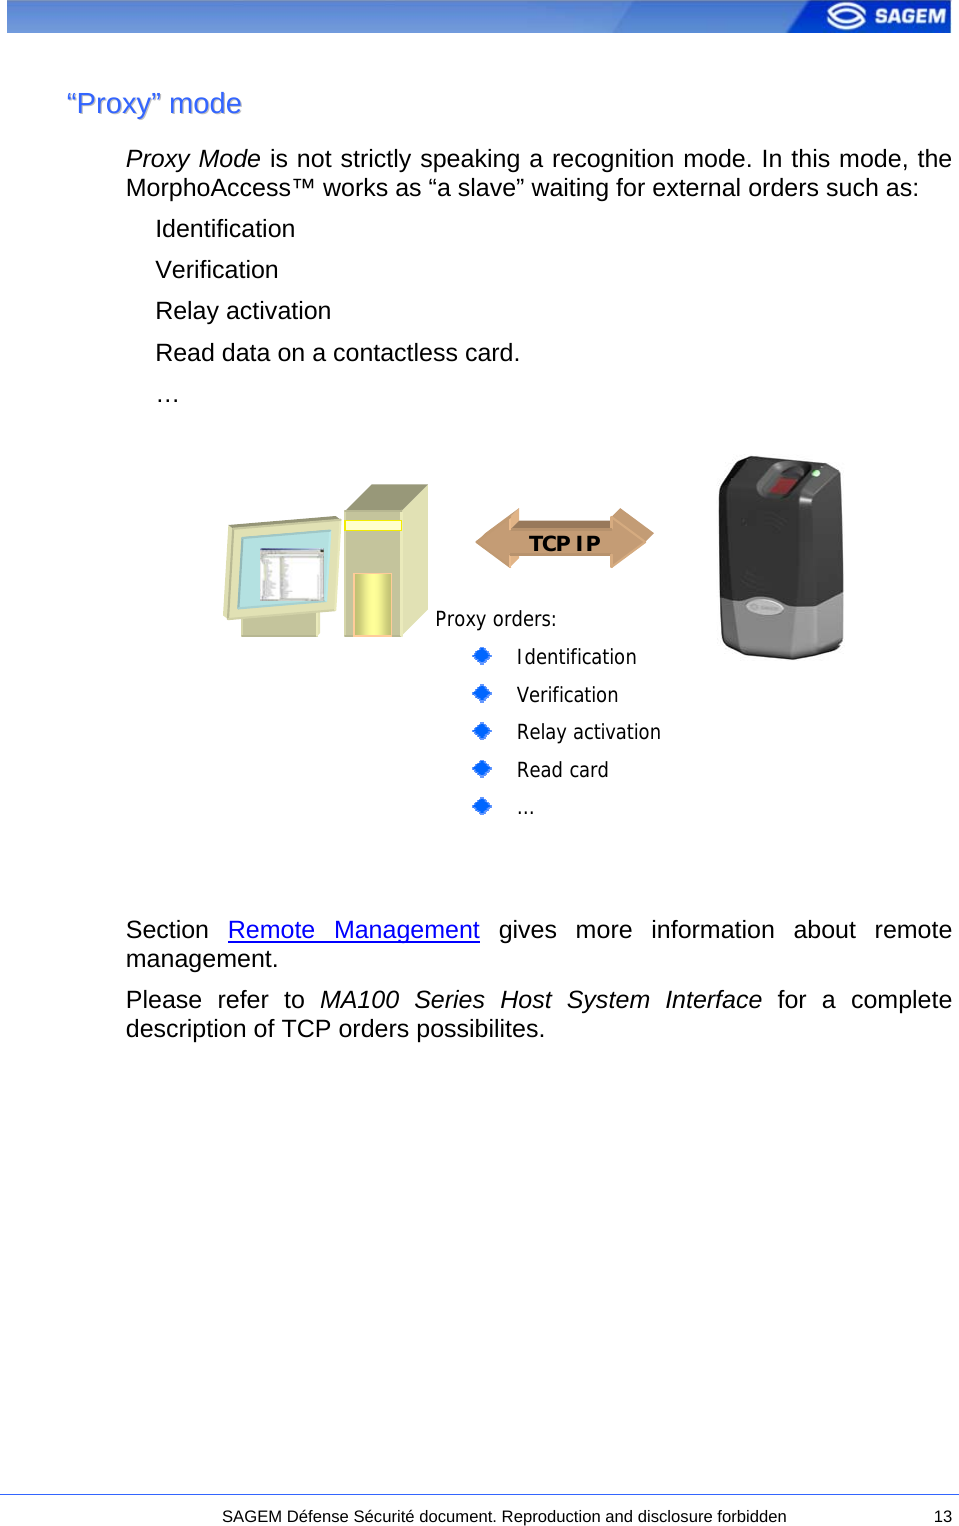  ““PPrrooxxyy””  mmooddee  Proxy Mode is not strictly speaking a recognition mode. In this mode, the MorphoAccess™ works as “a slave” waiting for external orders such as: Identification Verification Relay activation Read data on a contactless card. …   Proxy orders:   Identification   Verification   Relay activation    Read card   … TCP IP          Section  Remote Management gives more information about remote management. Please refer to MA100 Series Host System Interface for a complete description of TCP orders possibilites.   SAGEM Défense Sécurité document. Reproduction and disclosure forbidden  13 